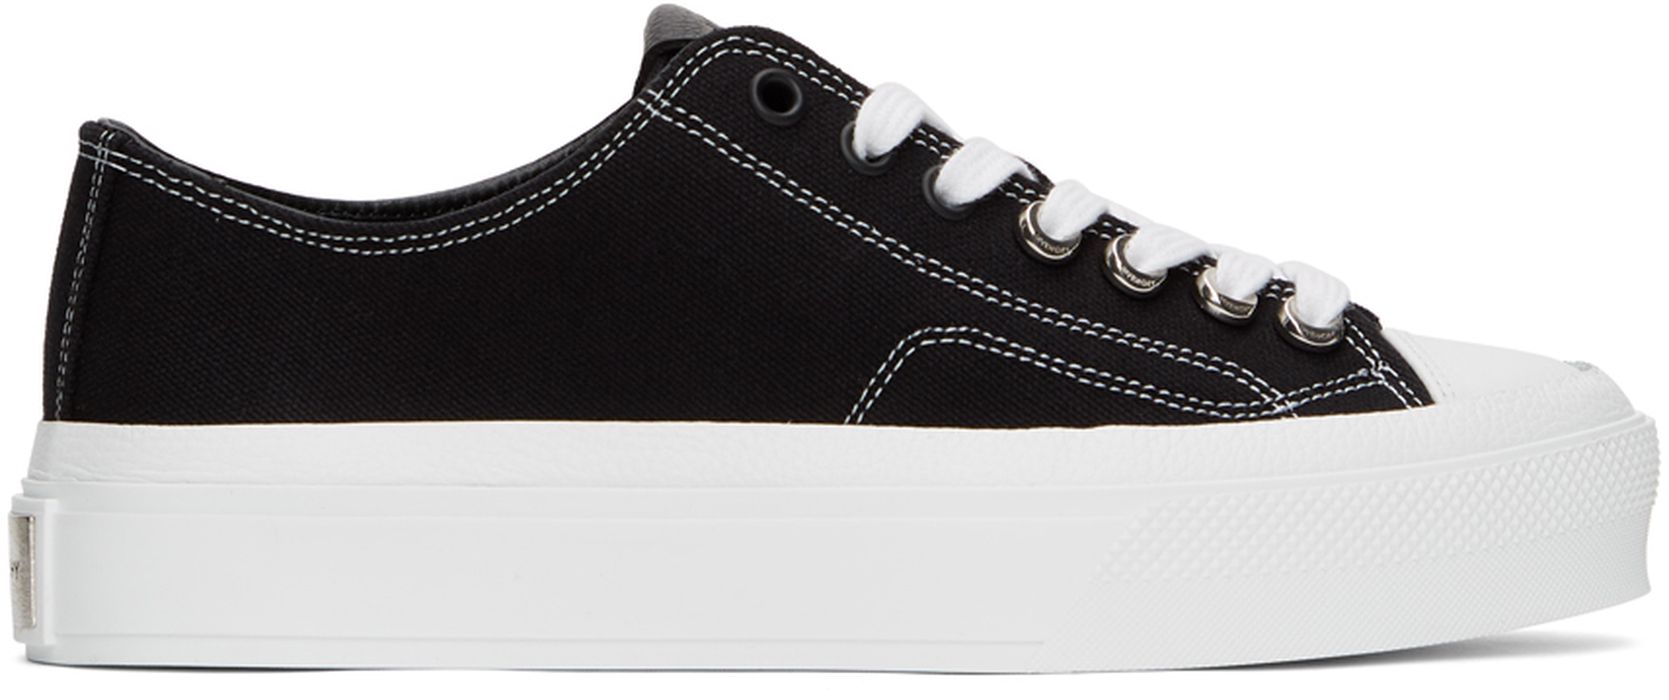 Givenchy Black Canvas & Leather City Sneakers